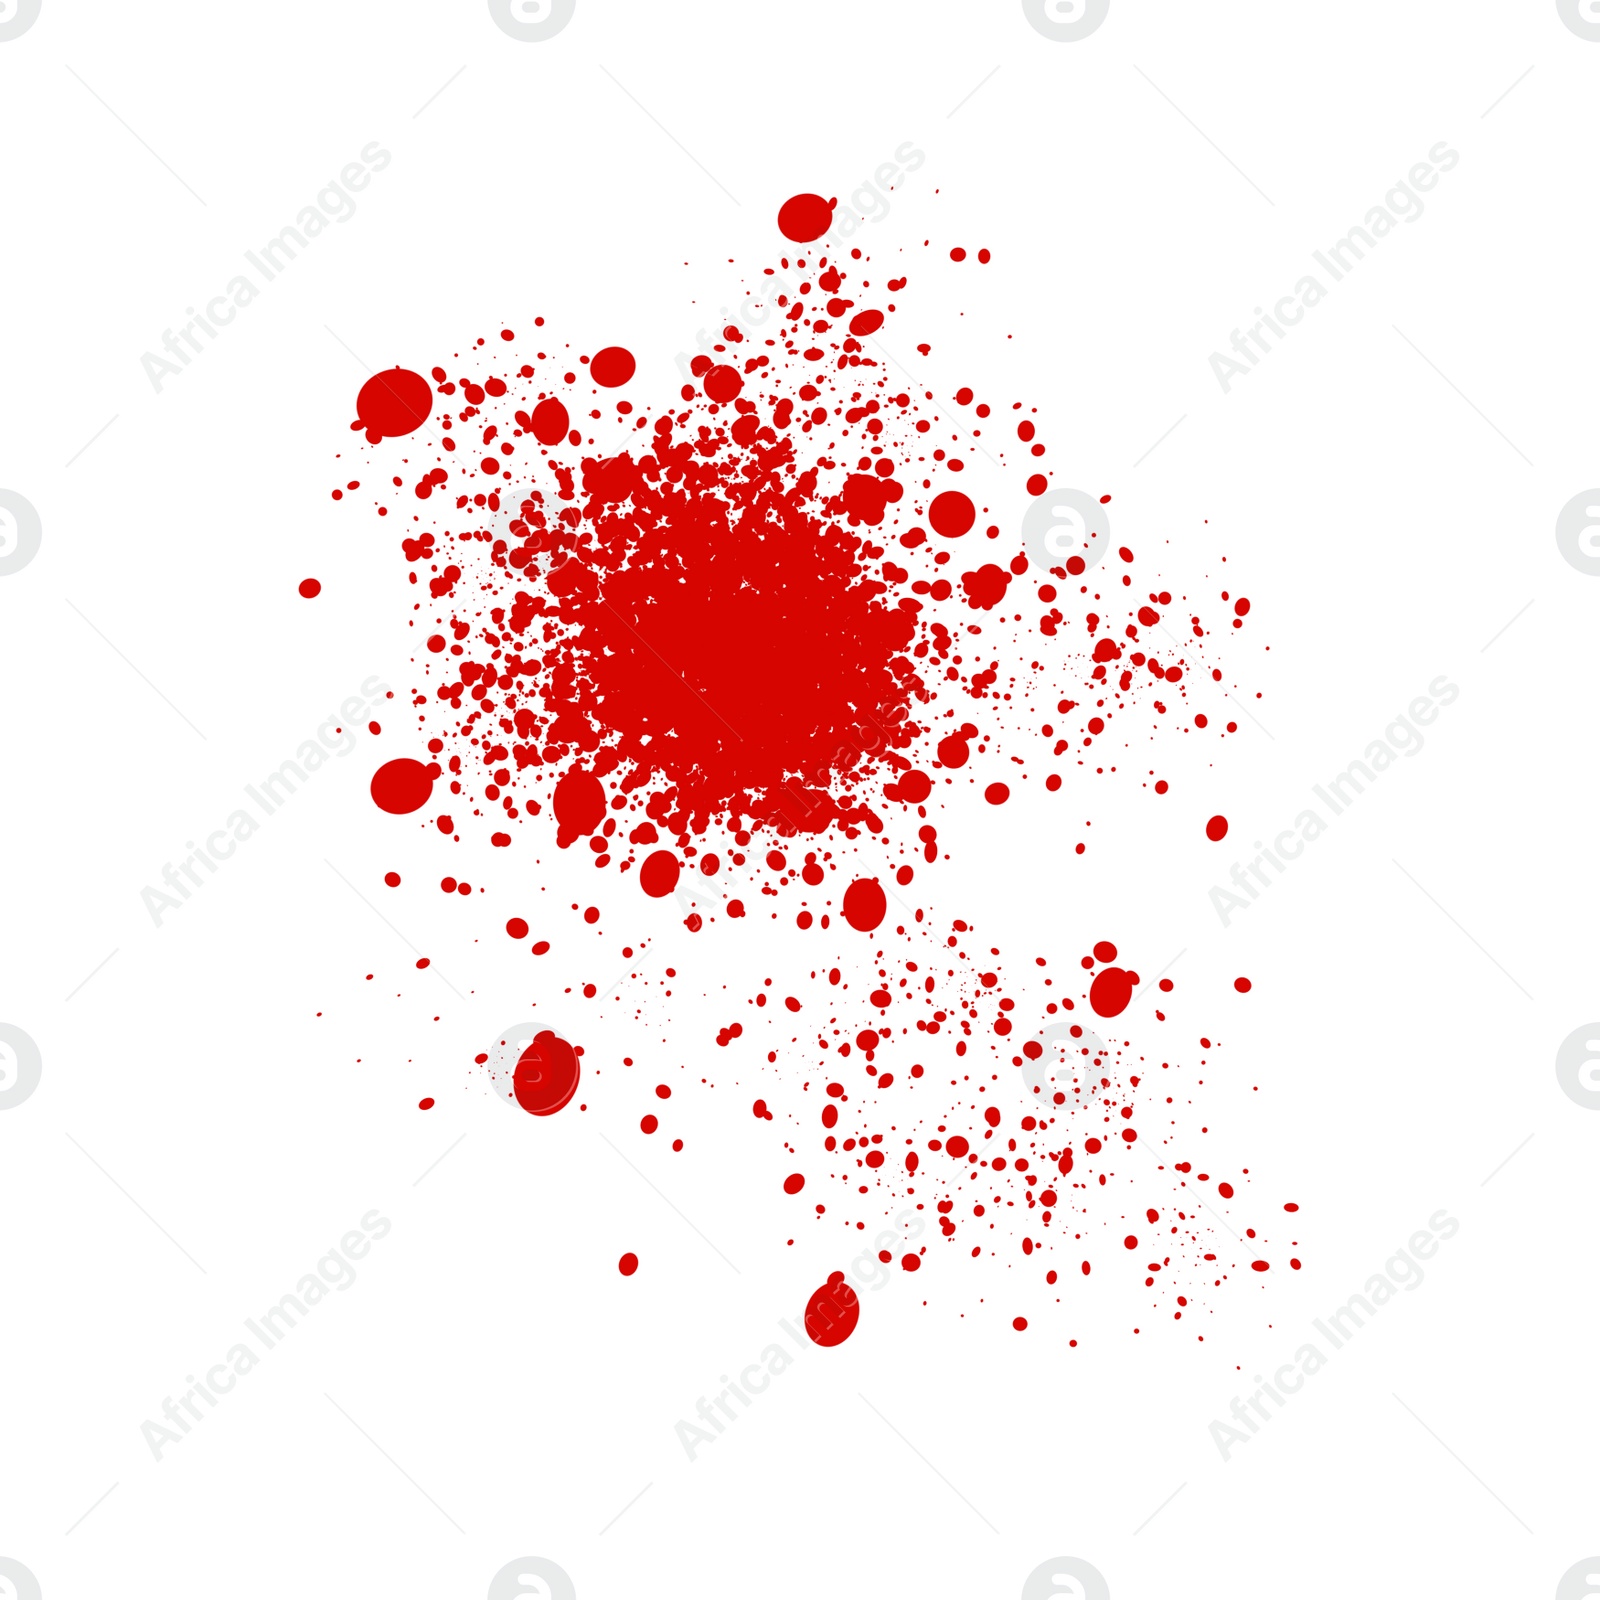 Illustration of Spot drawn by red spray paint on white background